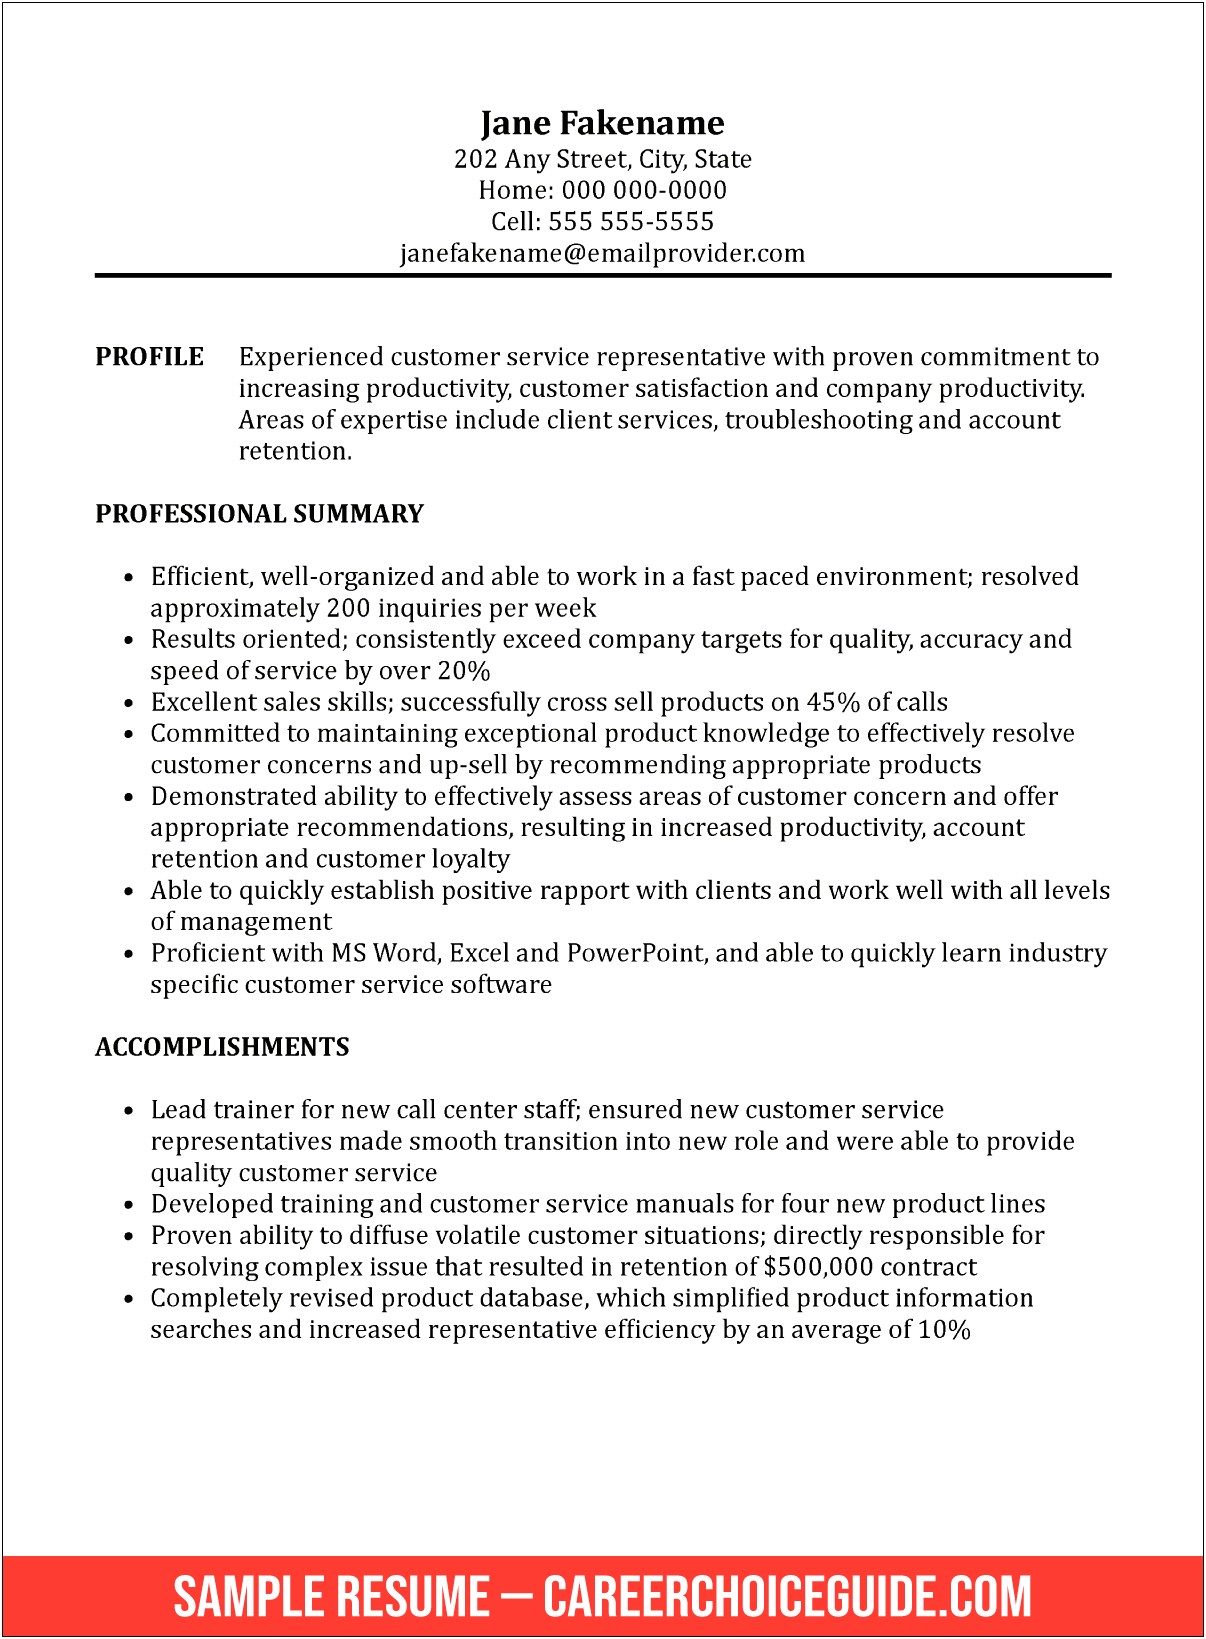 Skills To List For Account Services Resume